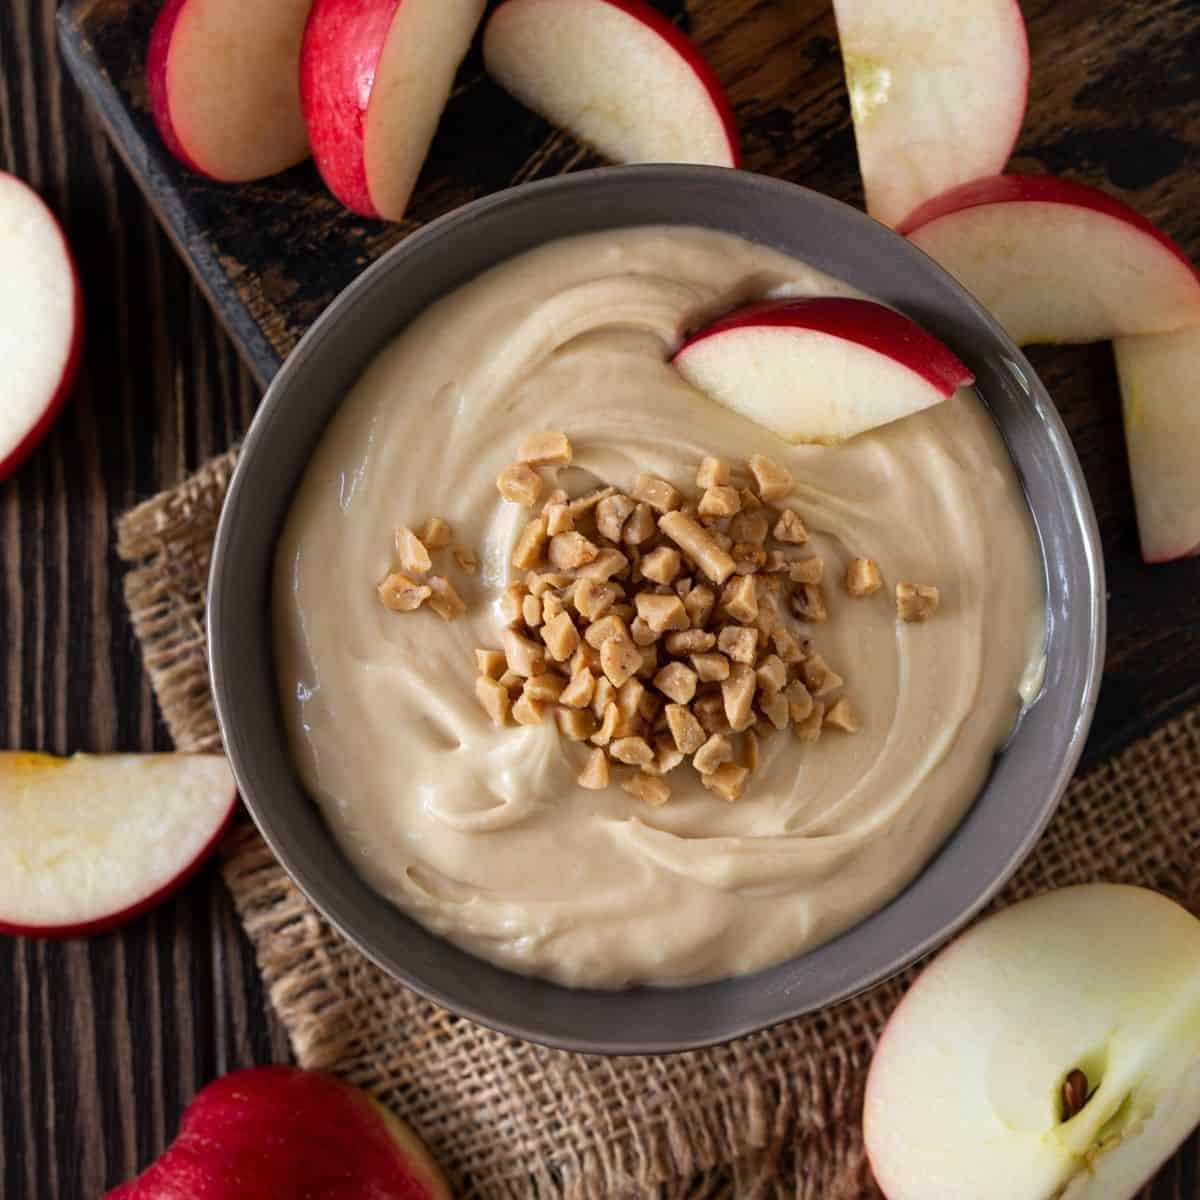 A bowl filled with Apple cream cheese dip and sliced apples on plate.